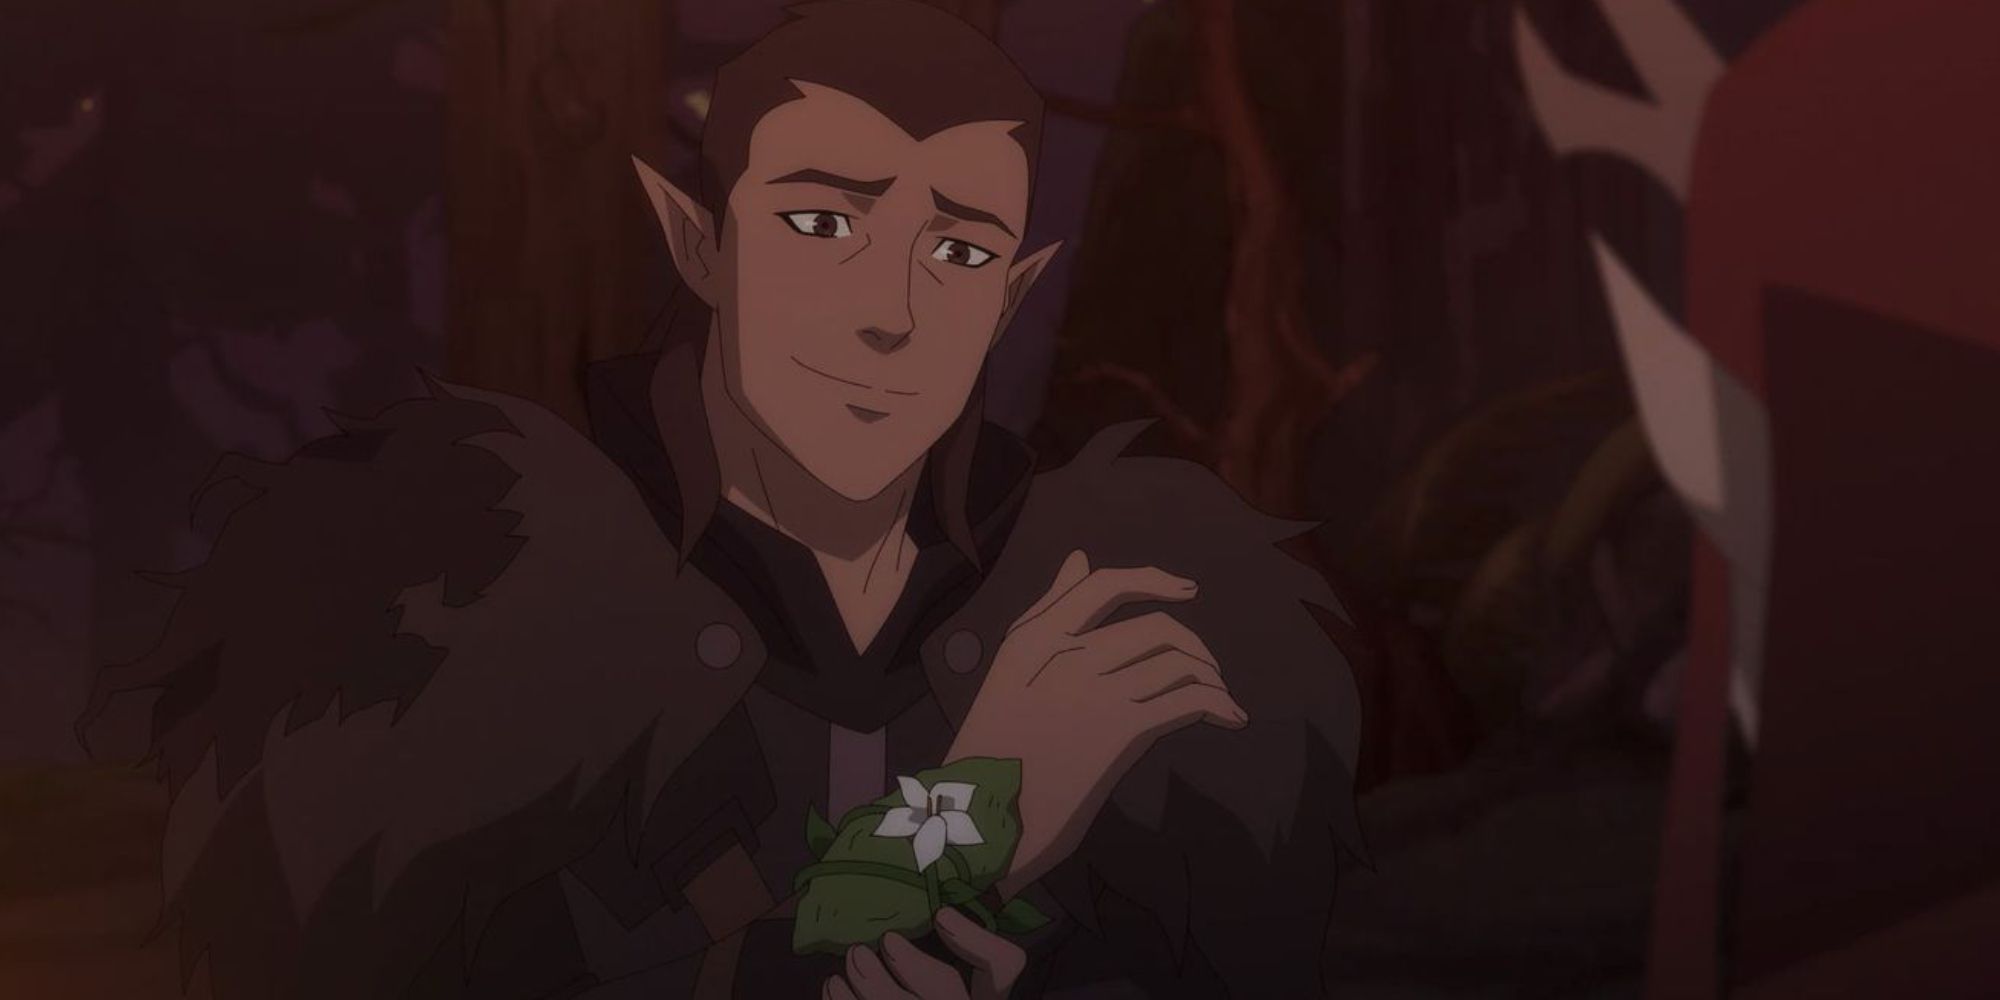 Vax'ildan, receiving a flower made from the Druidcraft of Keyleth.